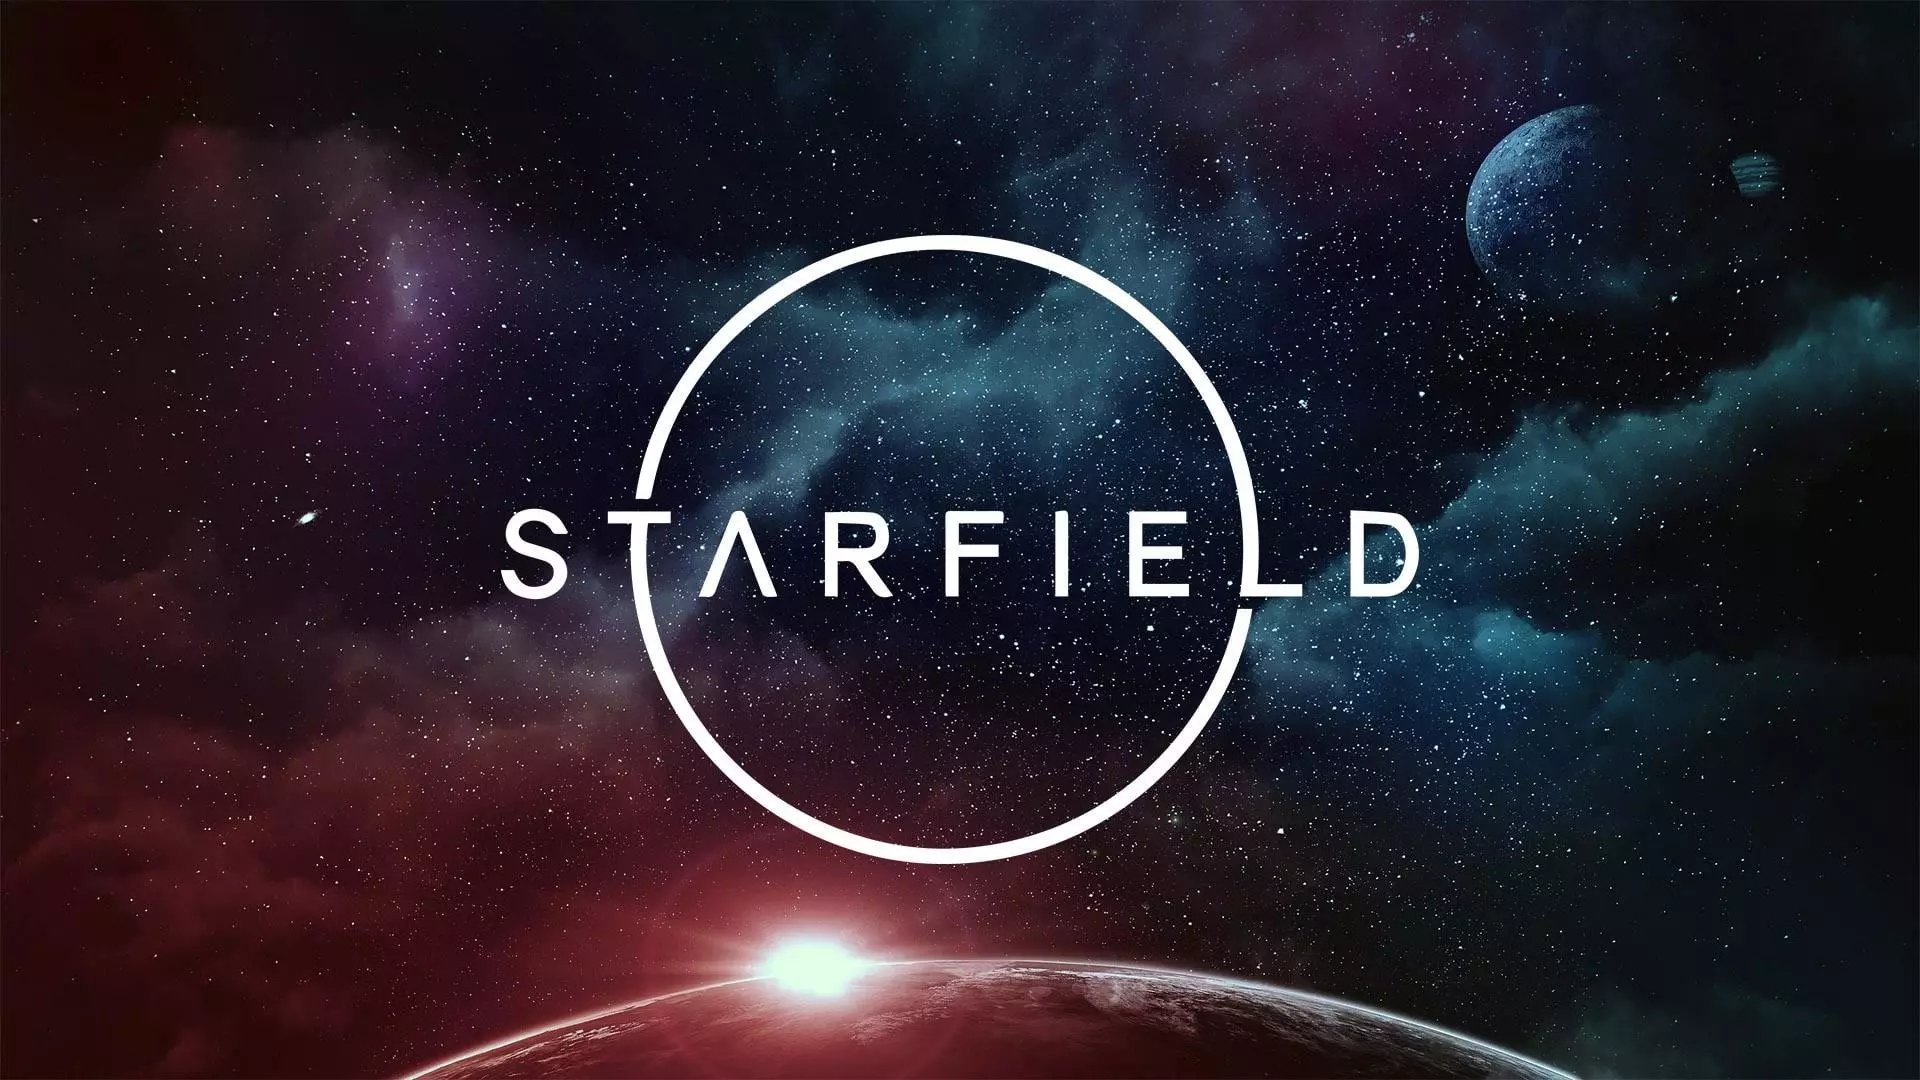 Starfield is Bethesda's upcoming sci-fi RPG /